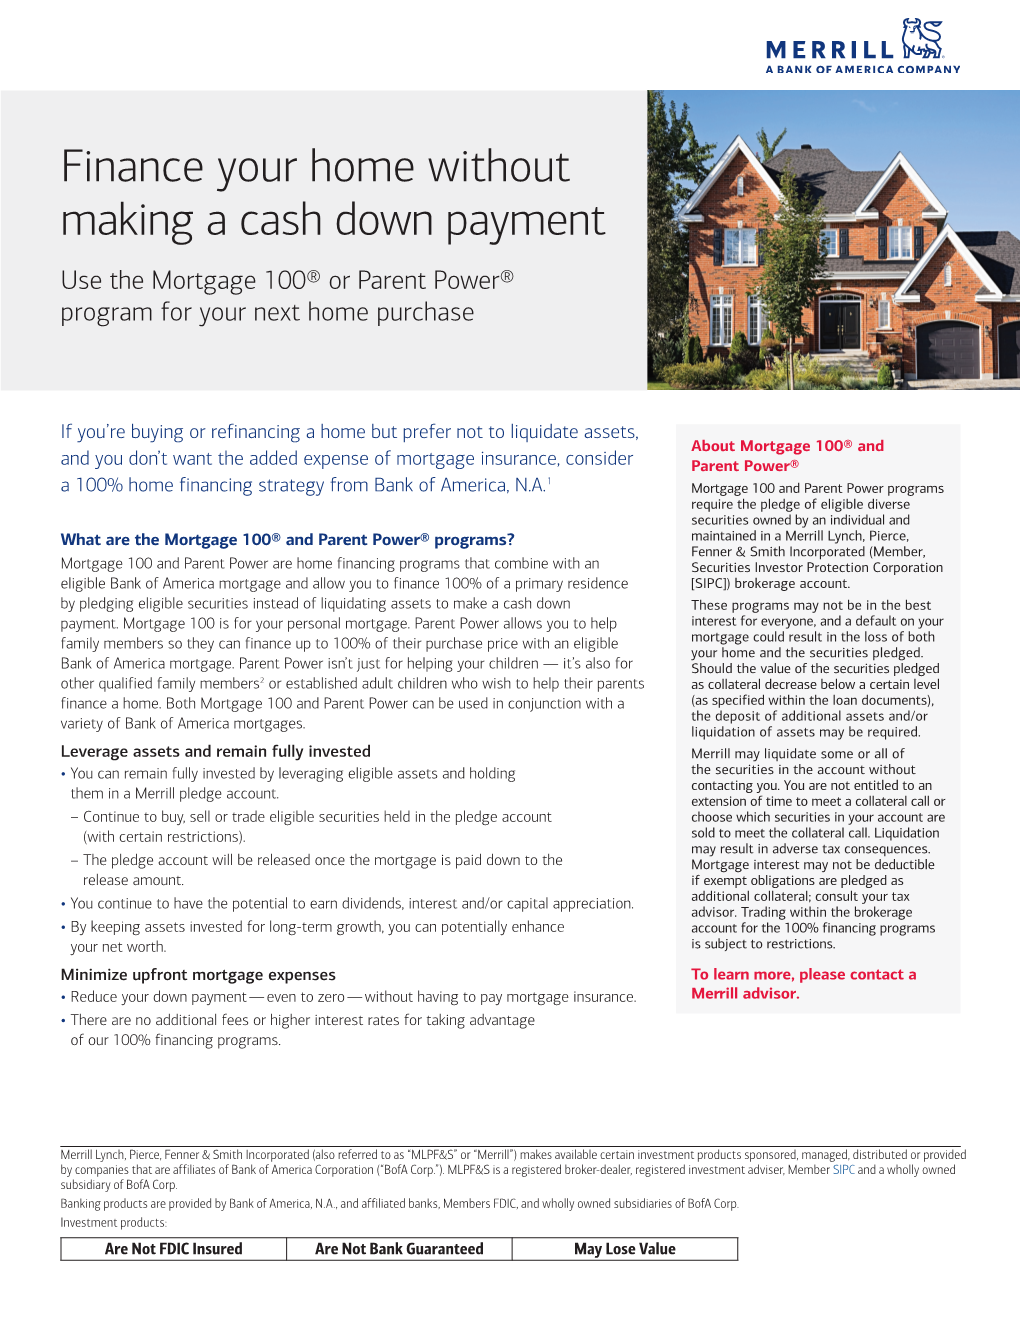 Finance Your Home Without Making a Cash Down Payment Use the Mortgage 100® Or Parent Power® Program for Your Next Home Purchase